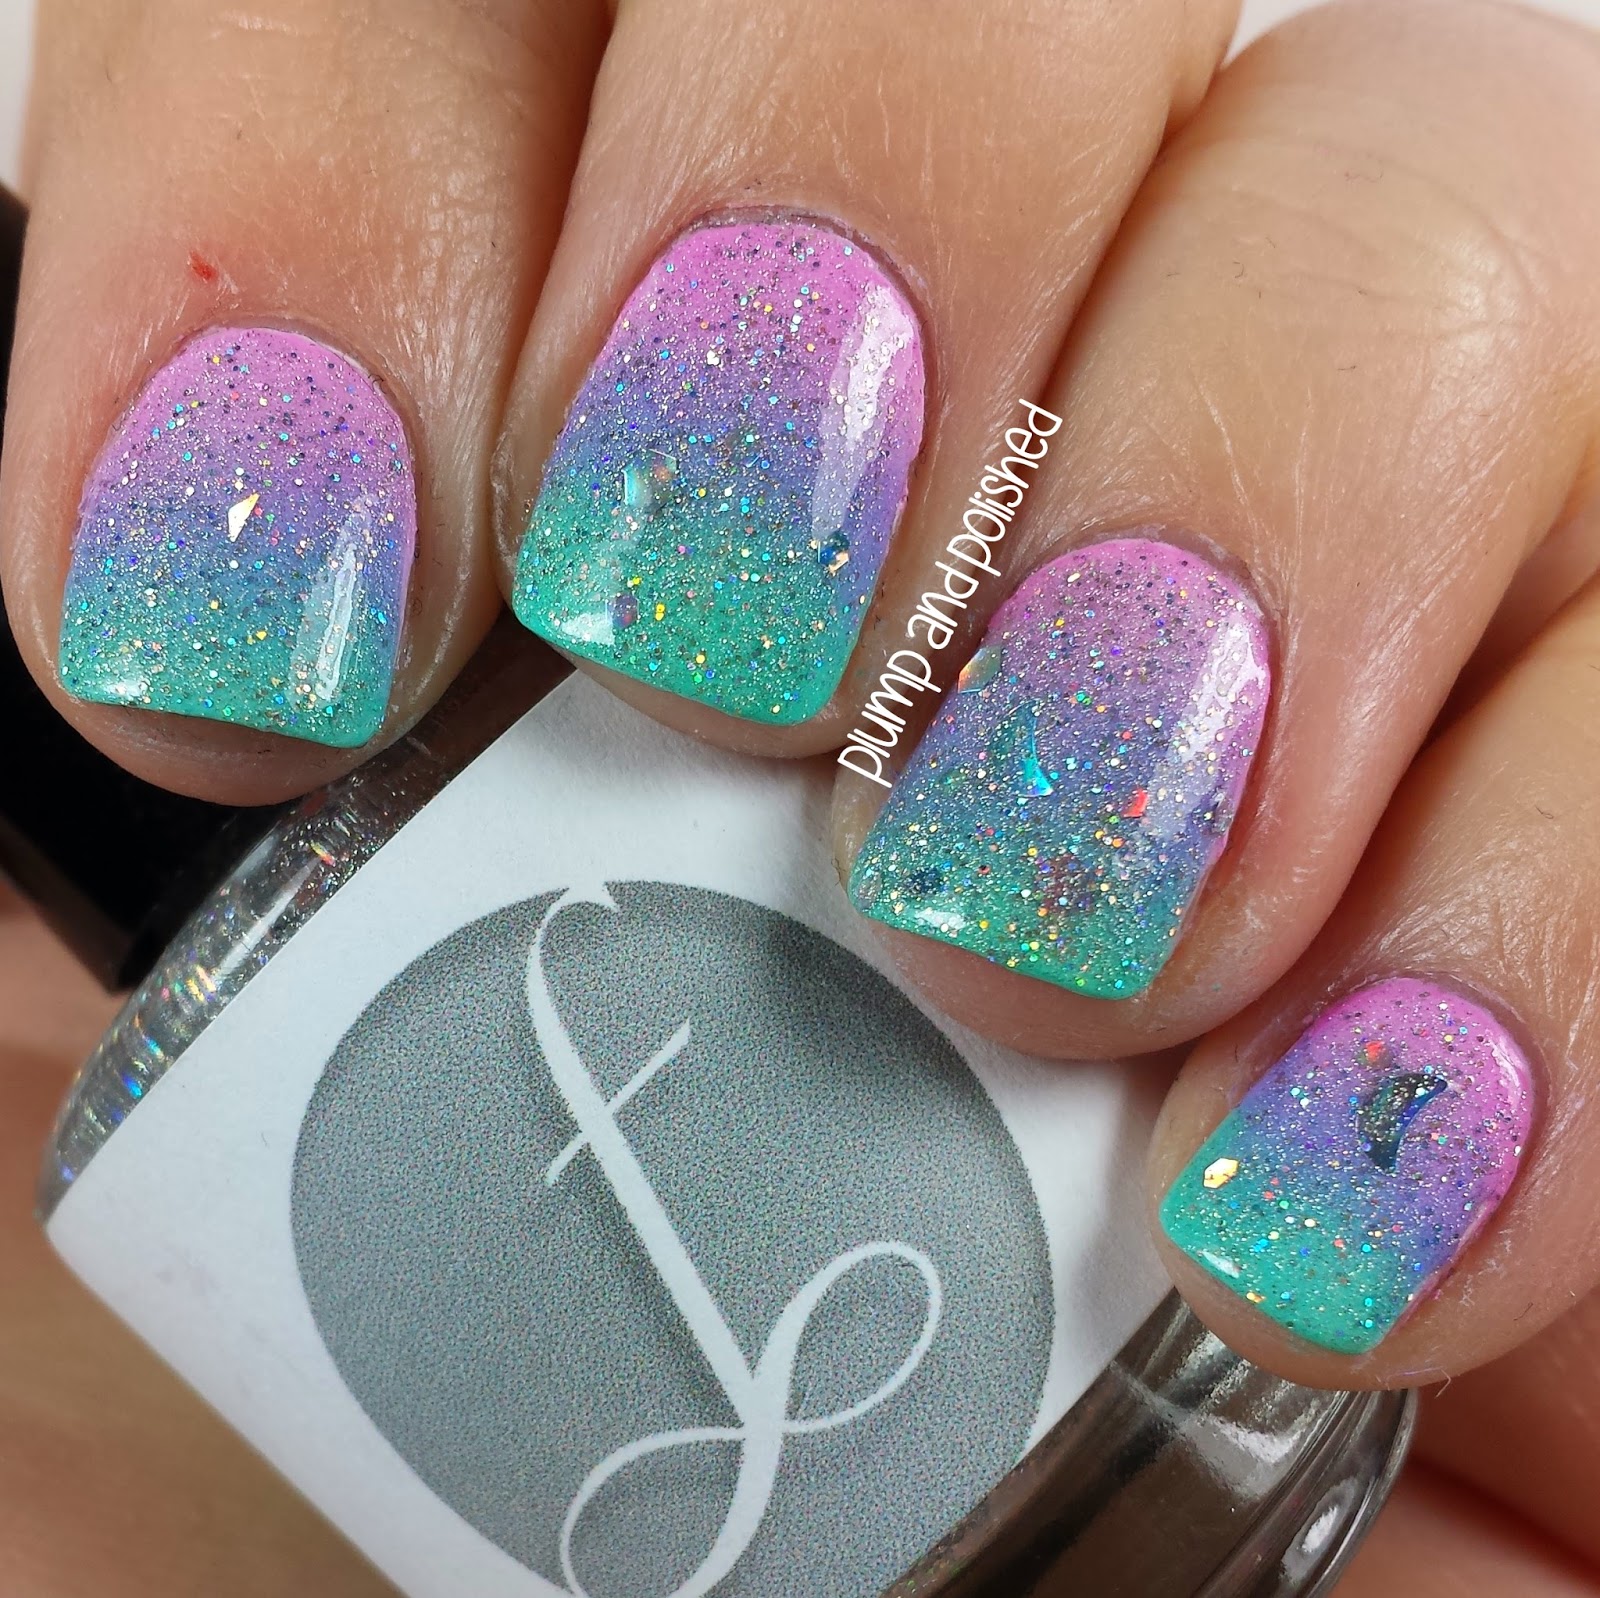 Plump and Polished: The Beauty Buffs: Pastels - Gradient Nail Art